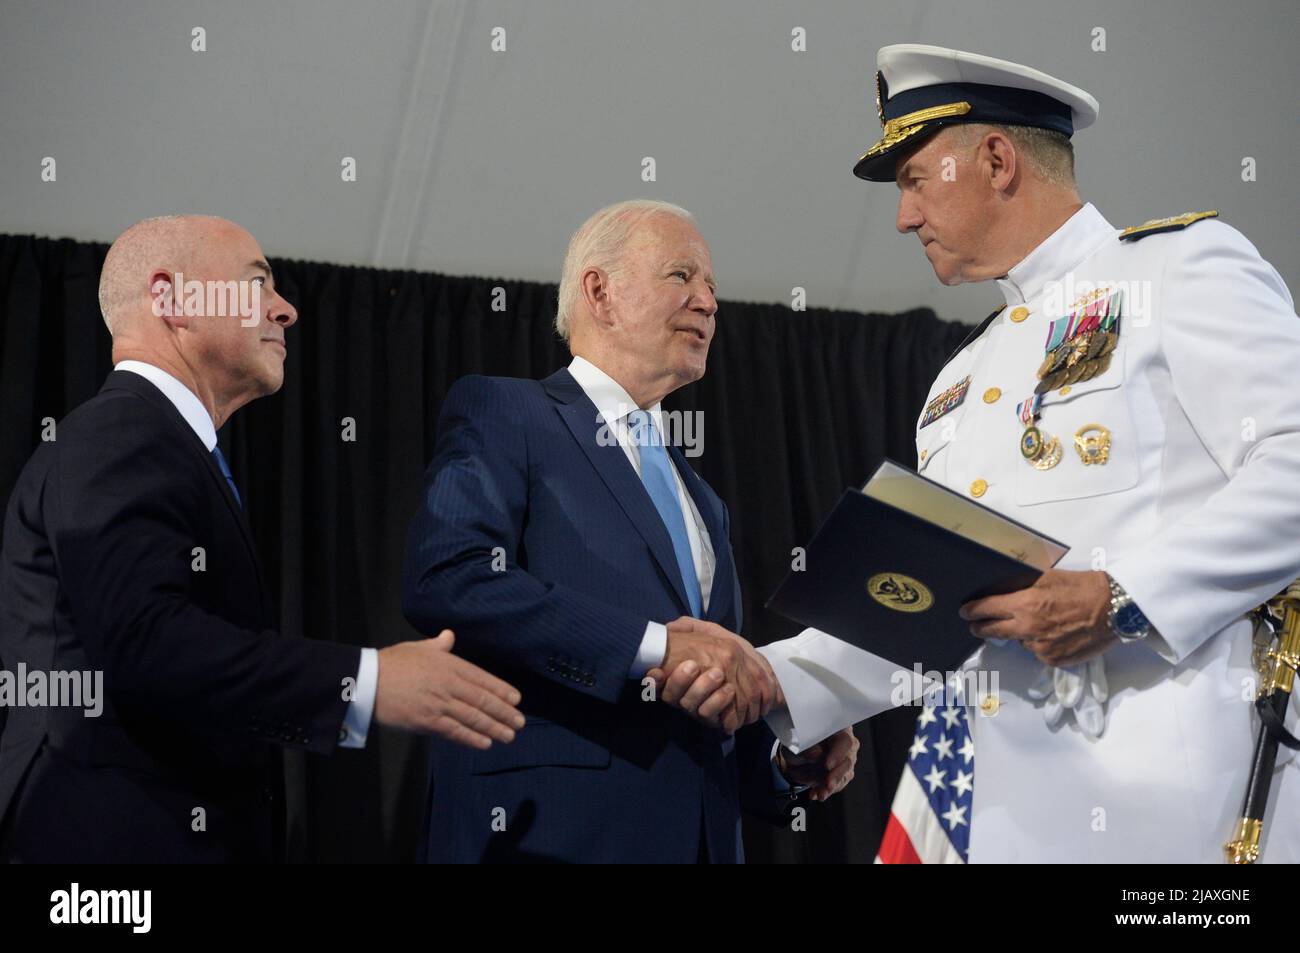 Washington, United States. 01st June, 2022. U.S. Coast Guard Adm. Karl L. Schultz shakes hand with President Joe Biden and Homeland Security Secretary Alejandro Mayorkas (L) during a change of command ceremony at Coast Guard Headquarters in Washington, DC on Wednesday, June 1, 2022. Coast Guard Adm. Linda Fagan is taking over command from Schultz. Photo by Bonnie Cash/Pool/Sipa USA Credit: Sipa USA/Alamy Live News Stock Photo